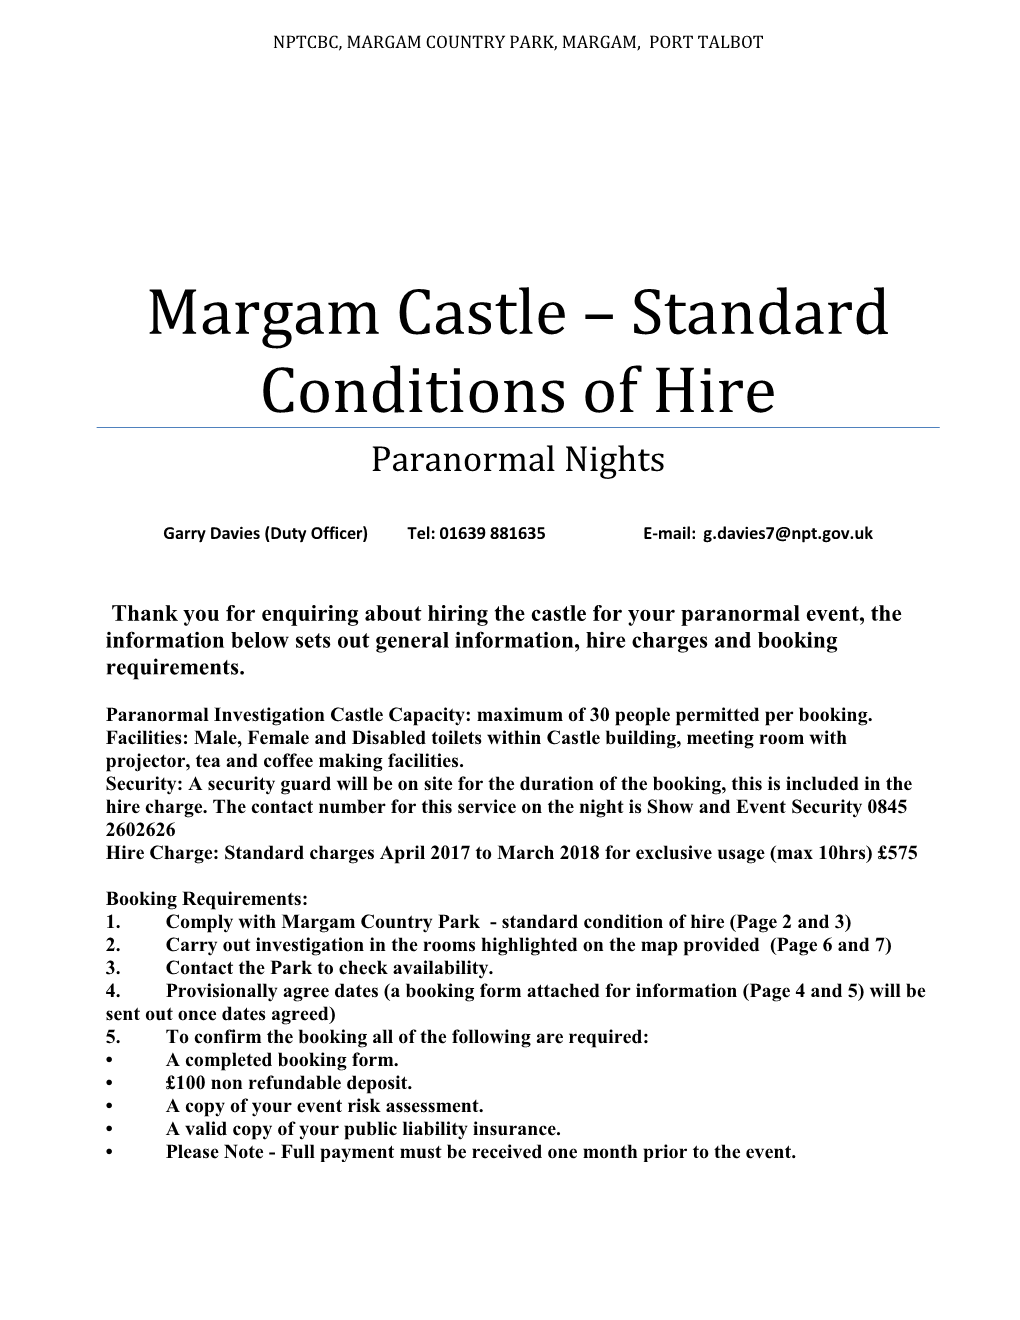 Margam Castle – Standard Conditions of Hire Paranormal Nights